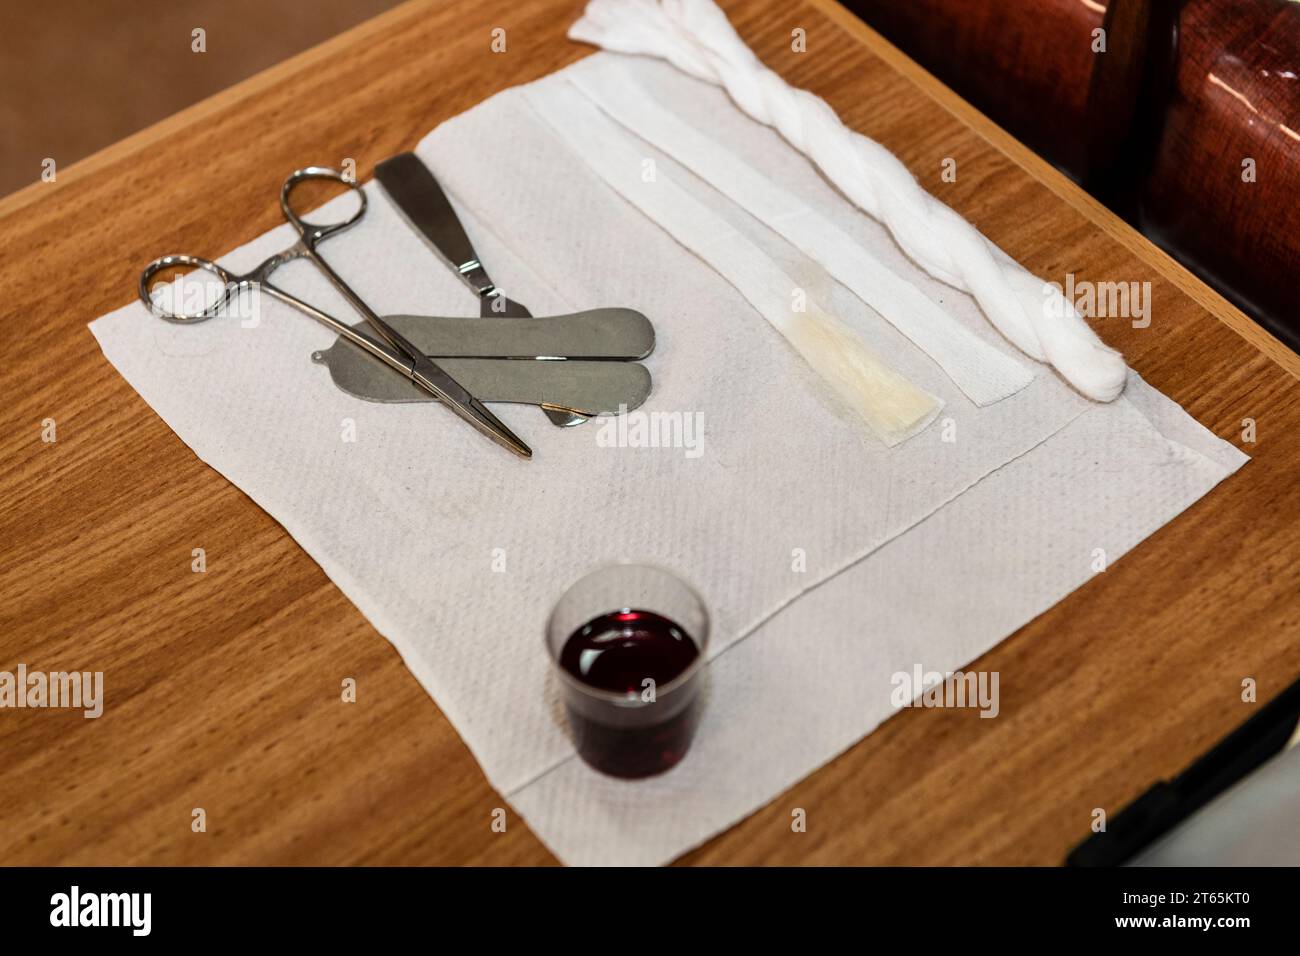 A mohel or ritual circumcisor prepares the instruments and ritual items, including wine, alcohol swabs and a cutting tool for a brit mila. Stock Photo